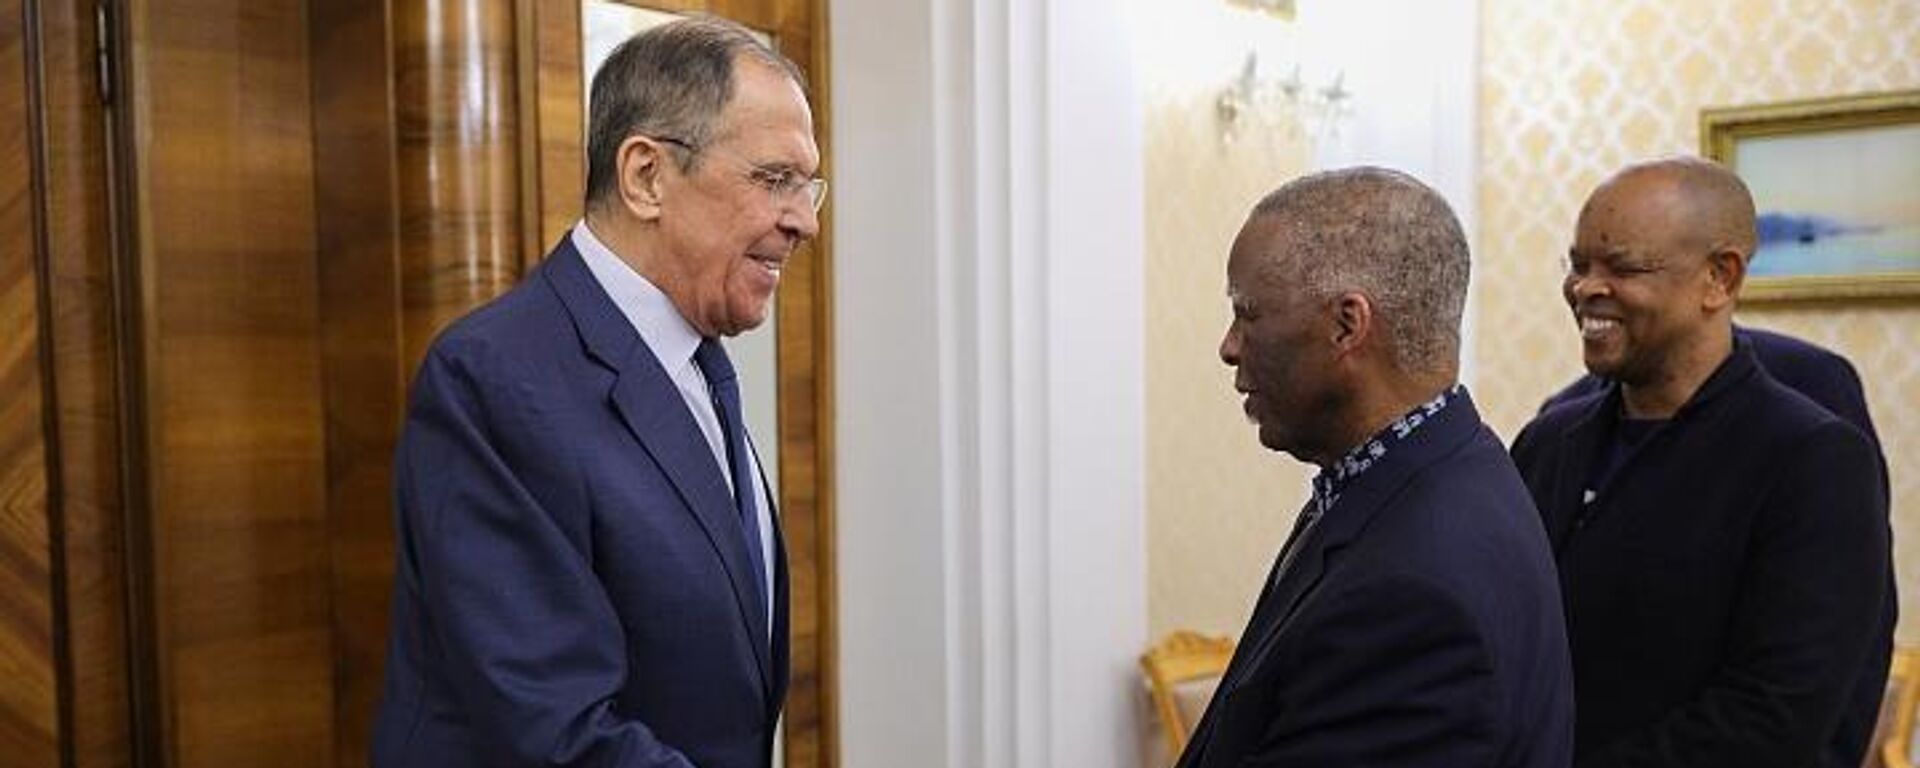 On November 27, the Russian Foreign Minister Sergey Lavrov met with former South African President Thabo Mbeki - Sputnik Africa, 1920, 28.11.2023